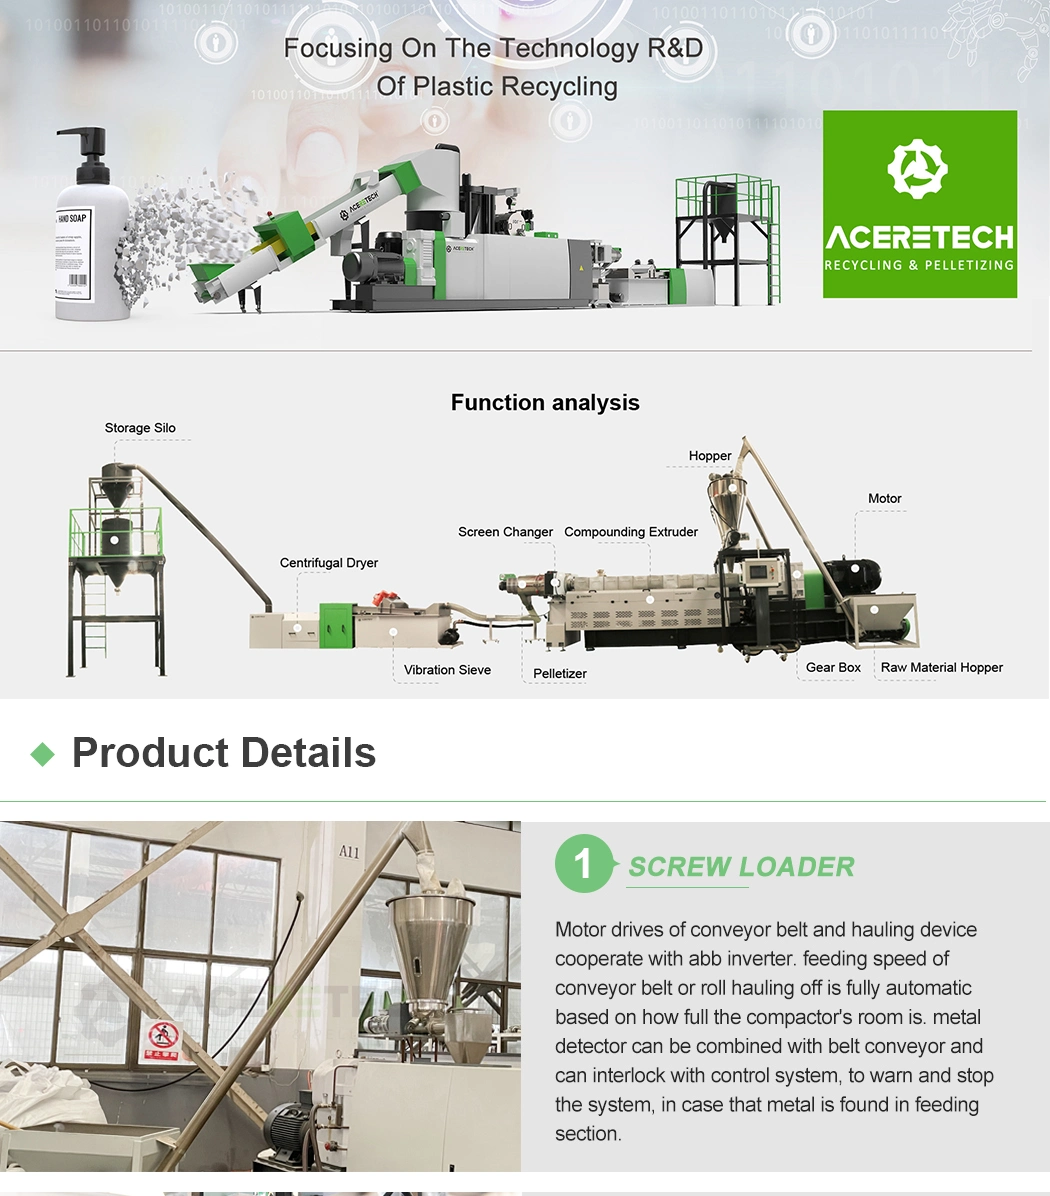 Twin Screw Extruder for Color Masterbatch Compounding Pelletizing